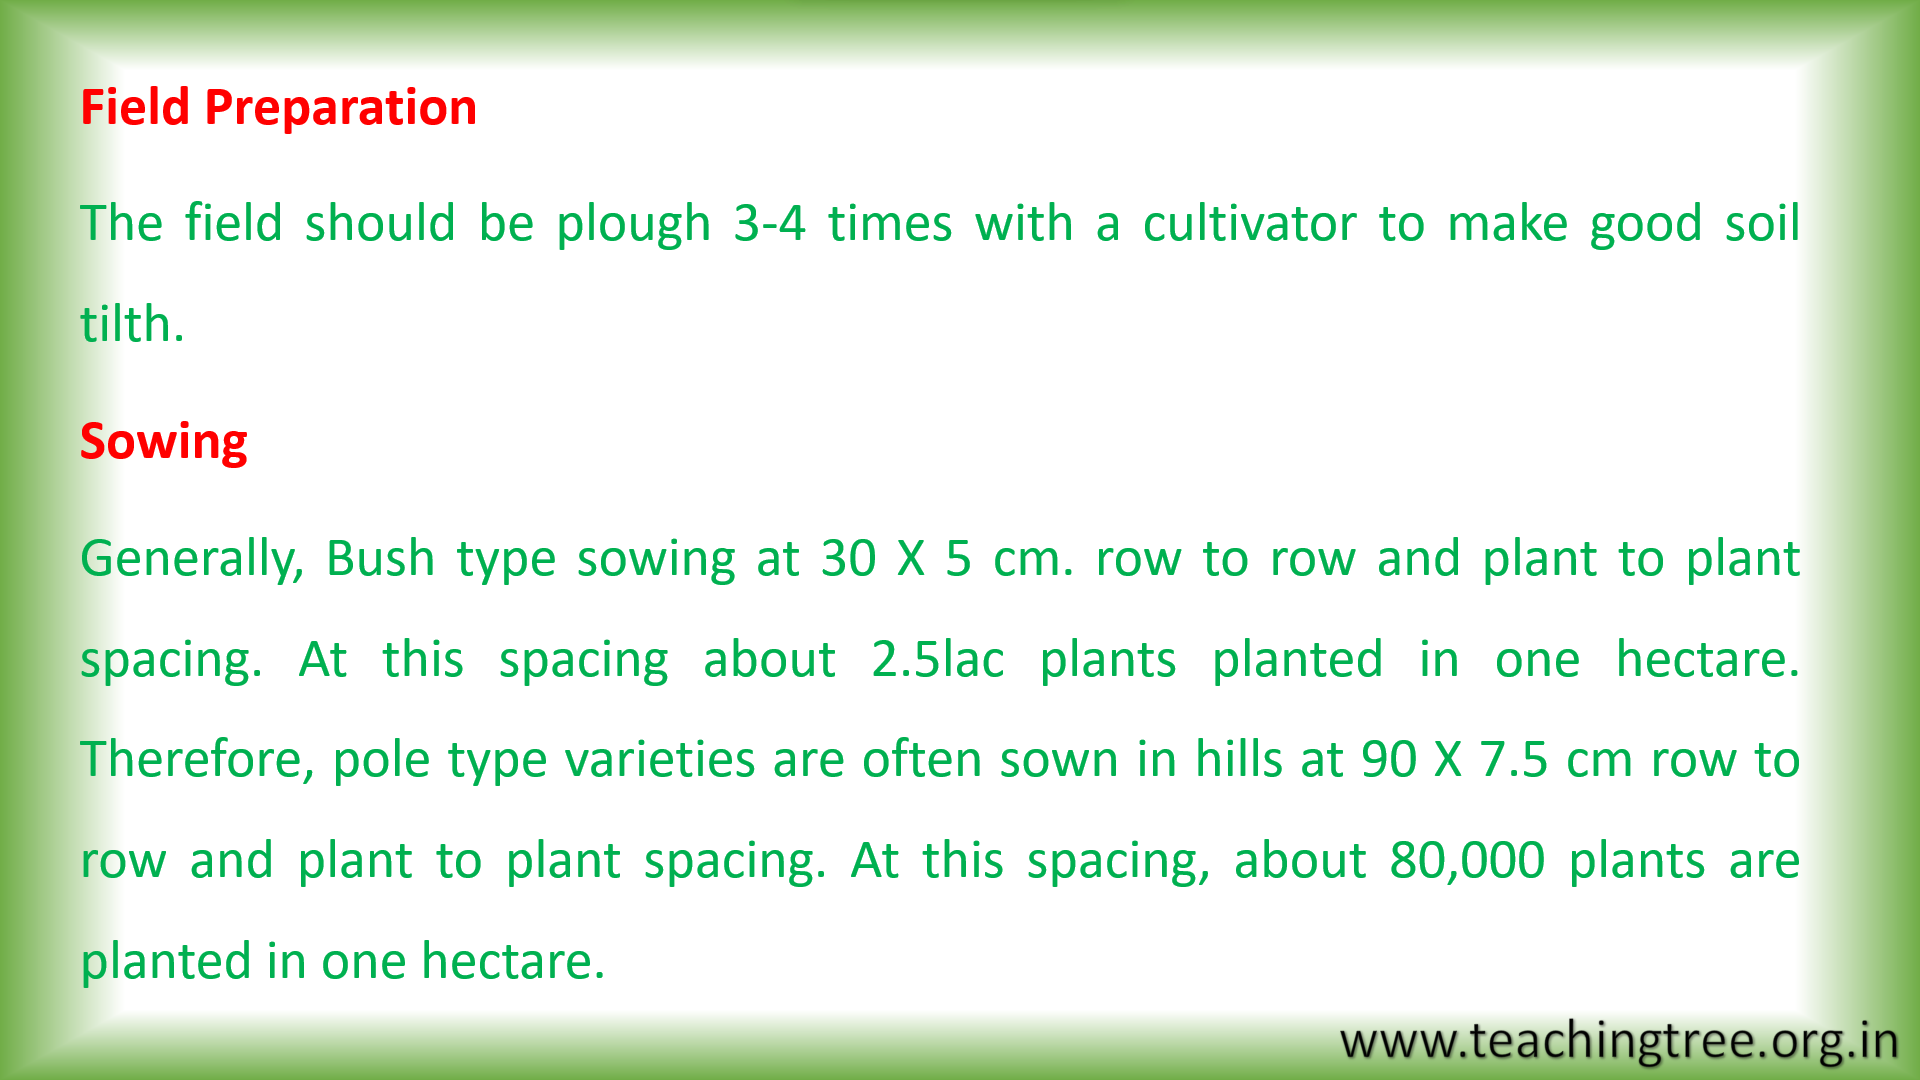 French Bean Cultivation PPT